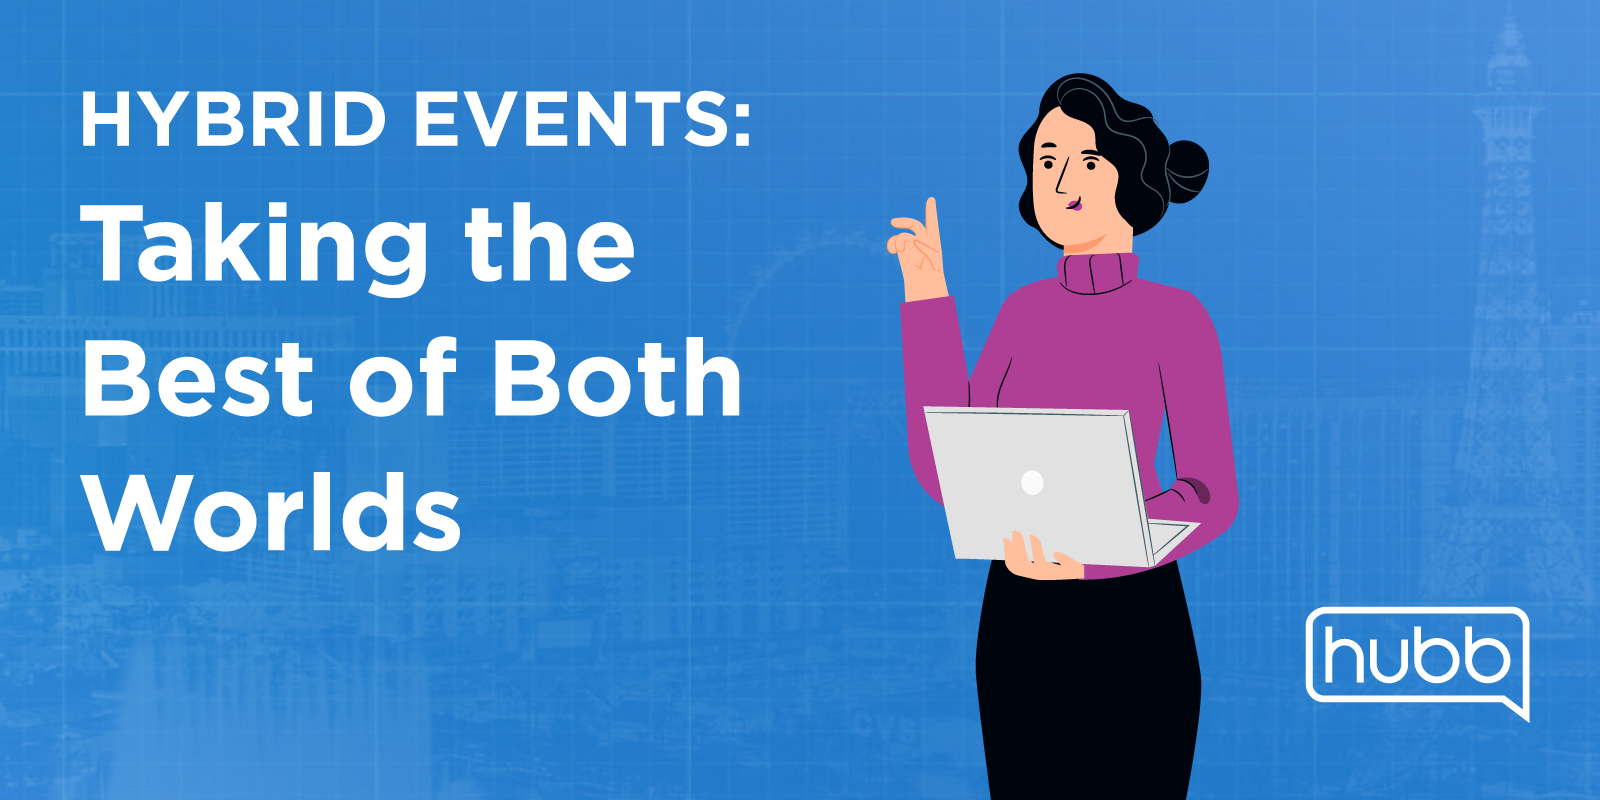 Hybrid Events: Taking the Best of Both Worlds